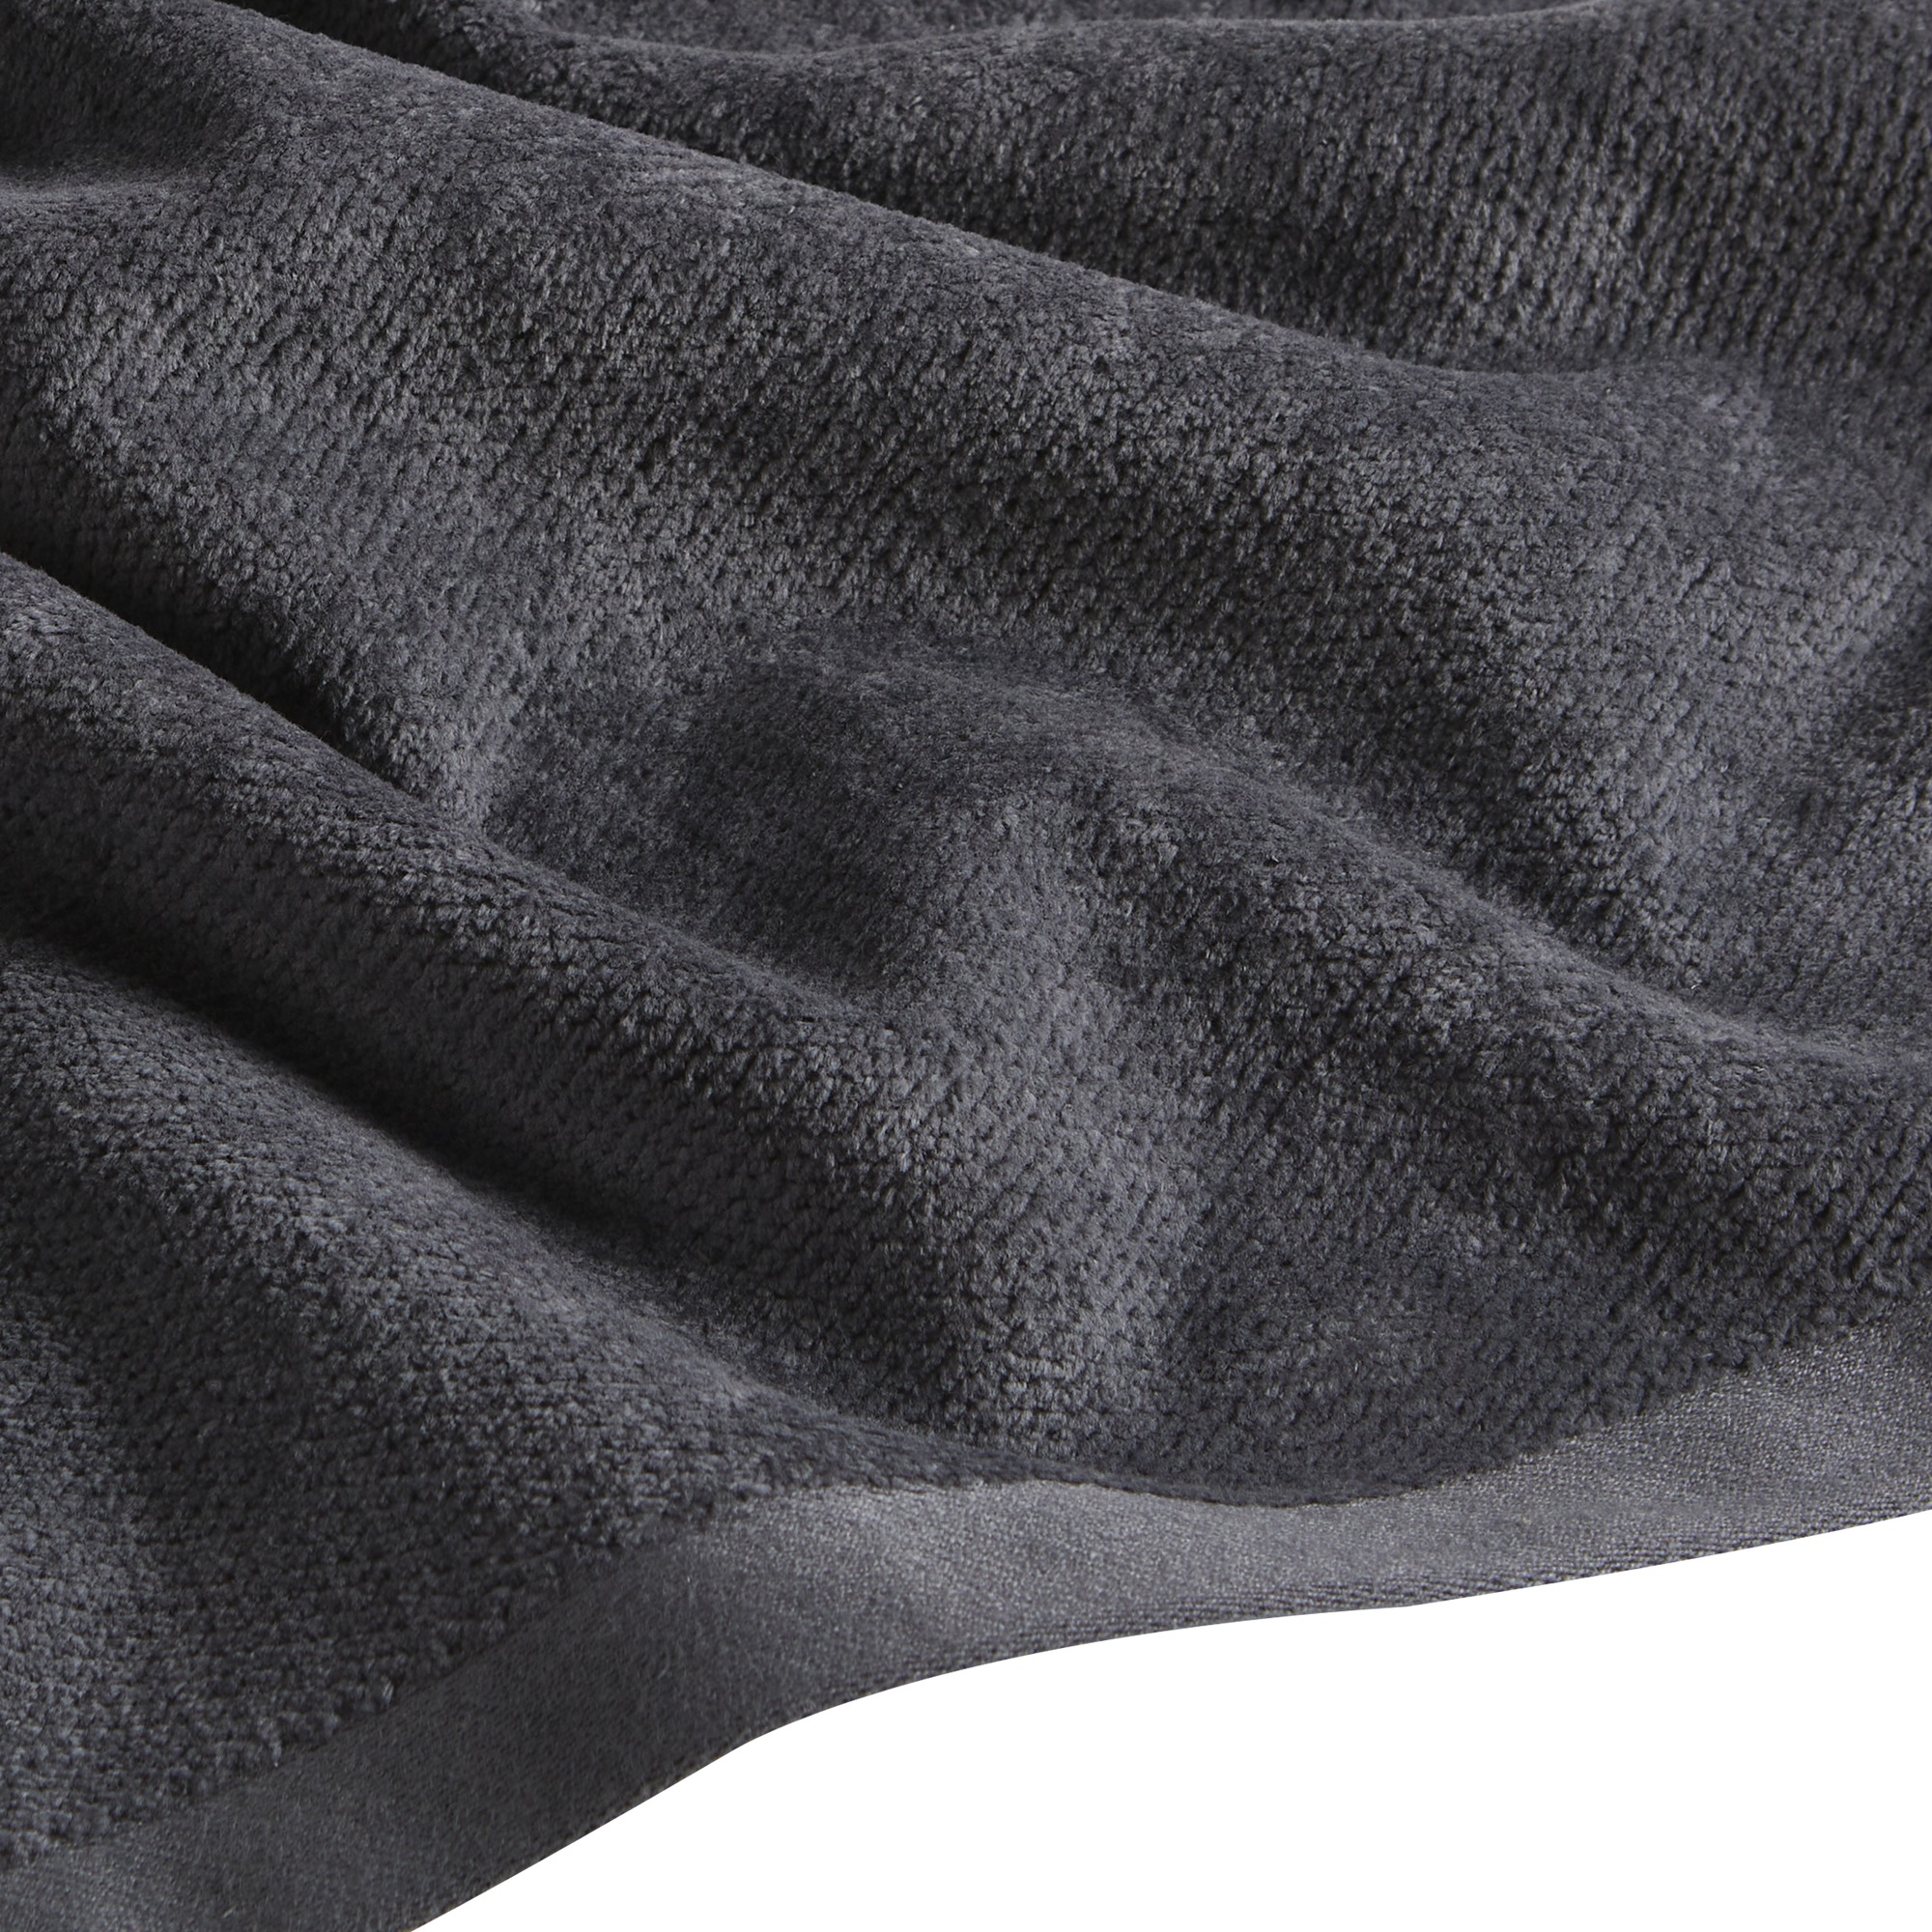 Take comfort in the luxurious feel of Velour towels: its subtle diamond-weave velour is backed with absorbent terrycloth to swaddle you in style—morning, noon, on night.